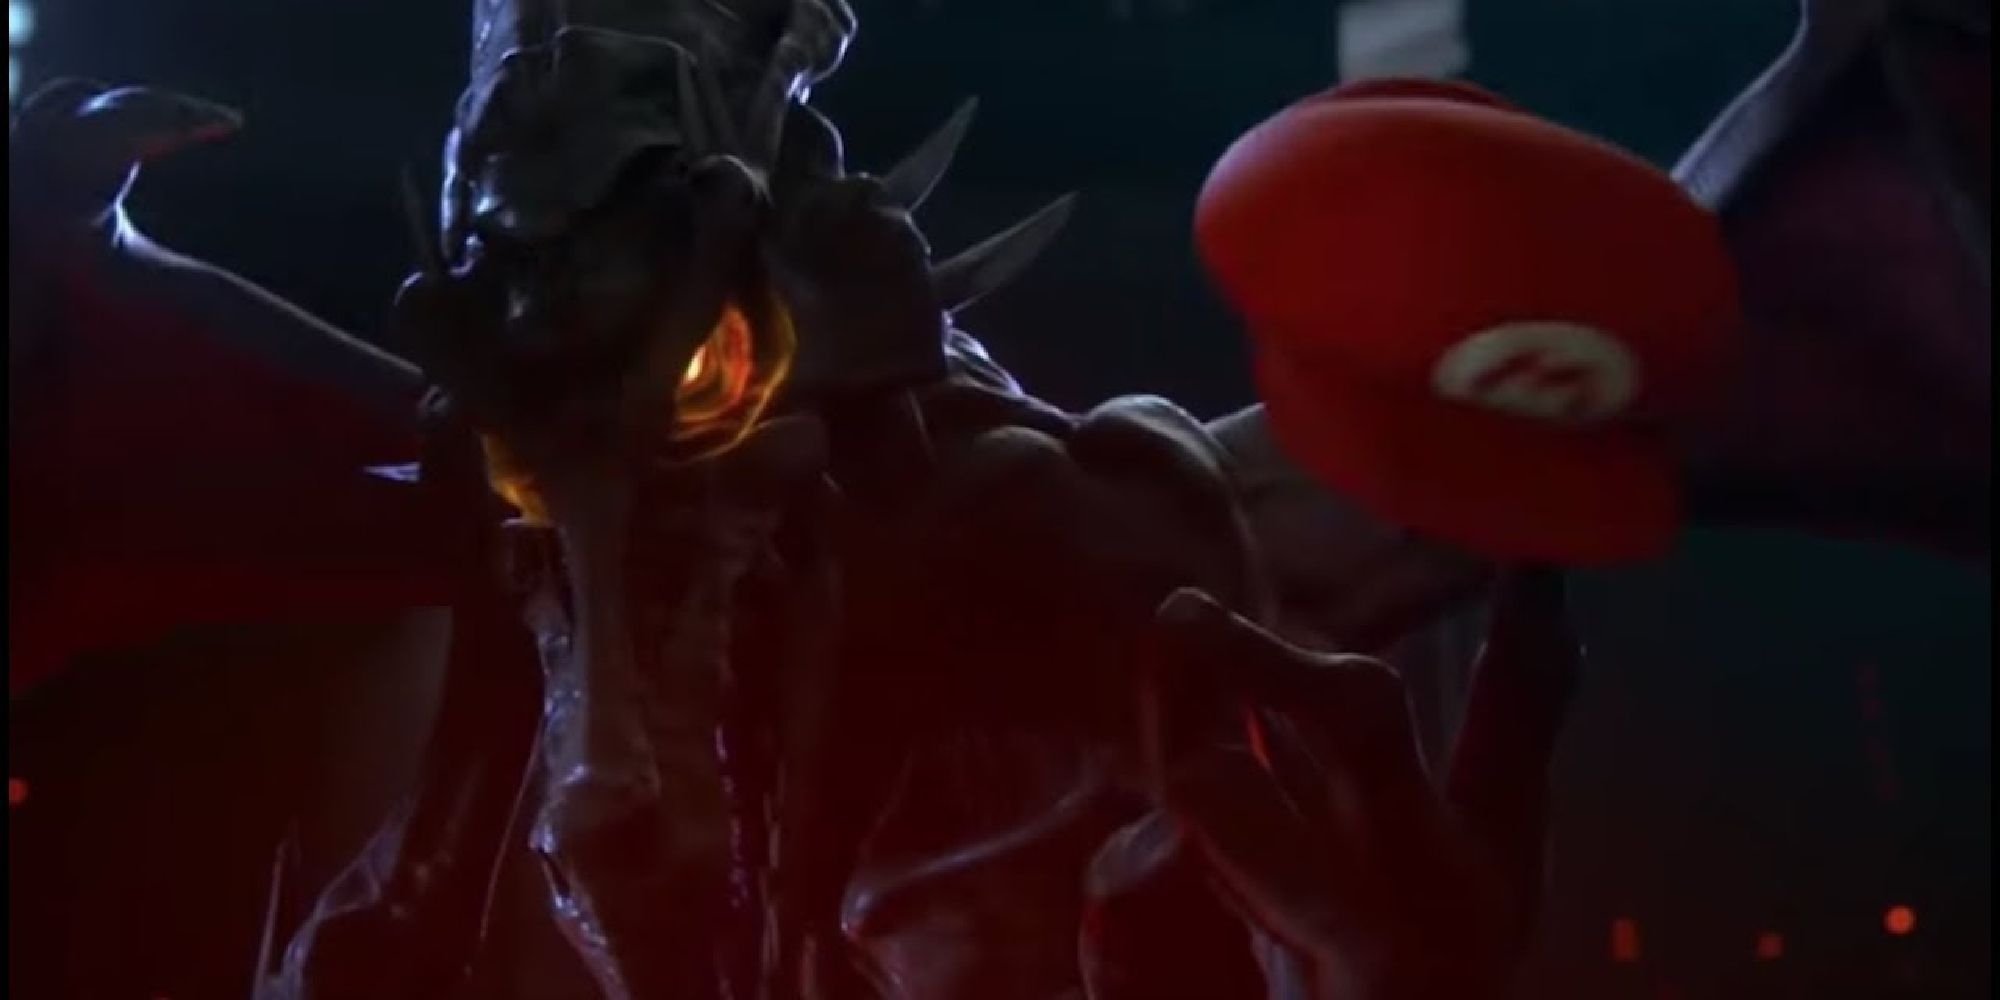 Ridley twirling Mario's hat in his reveal trailer for SSBU